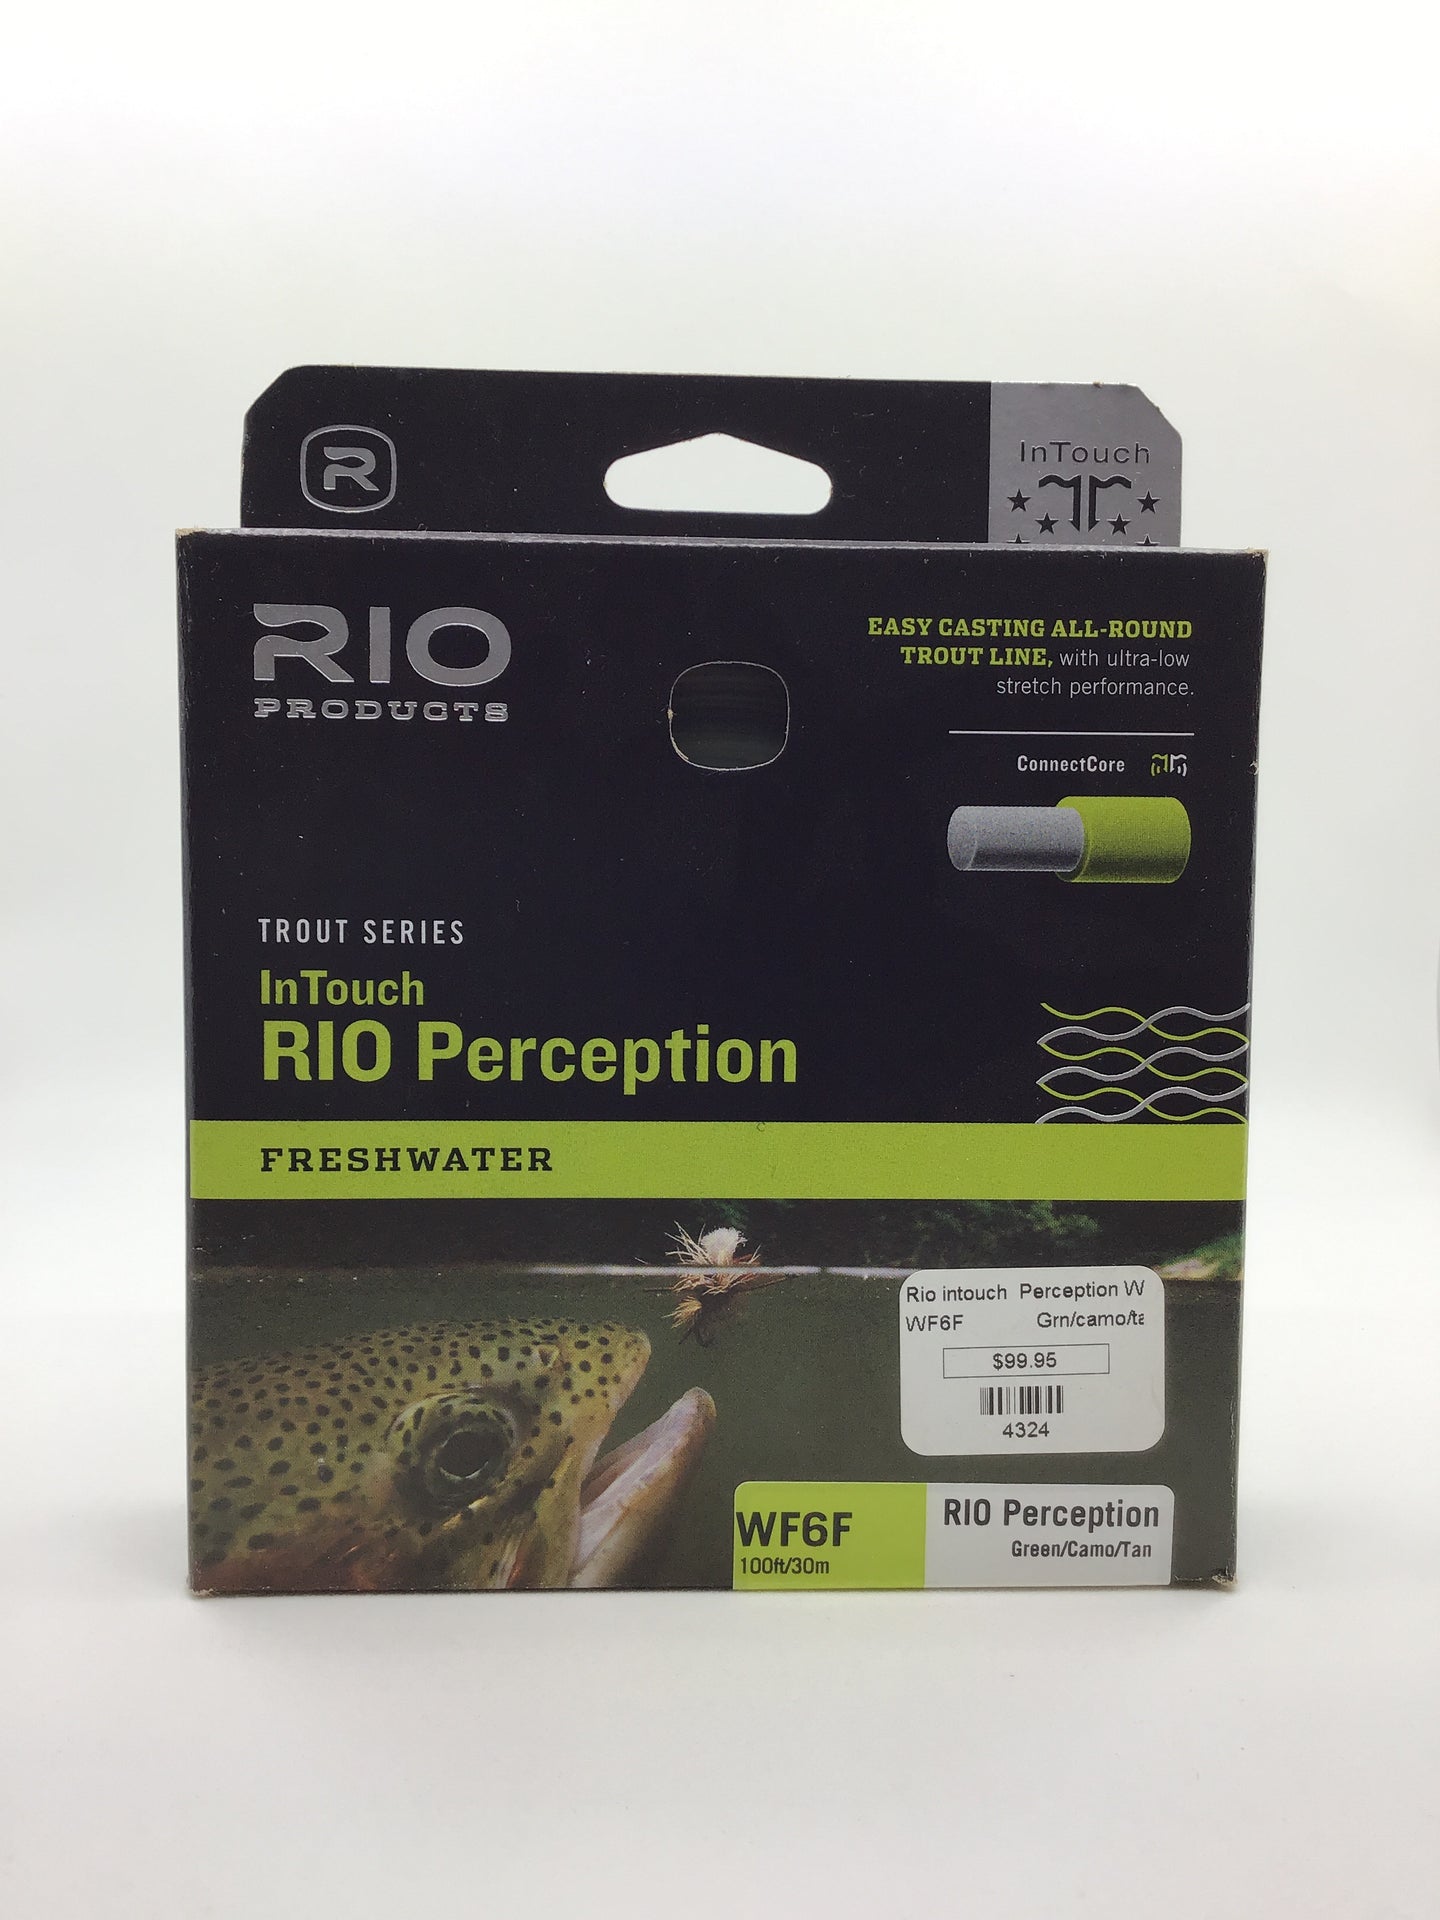 RIO InTouch Perception Freshwater Fly Line